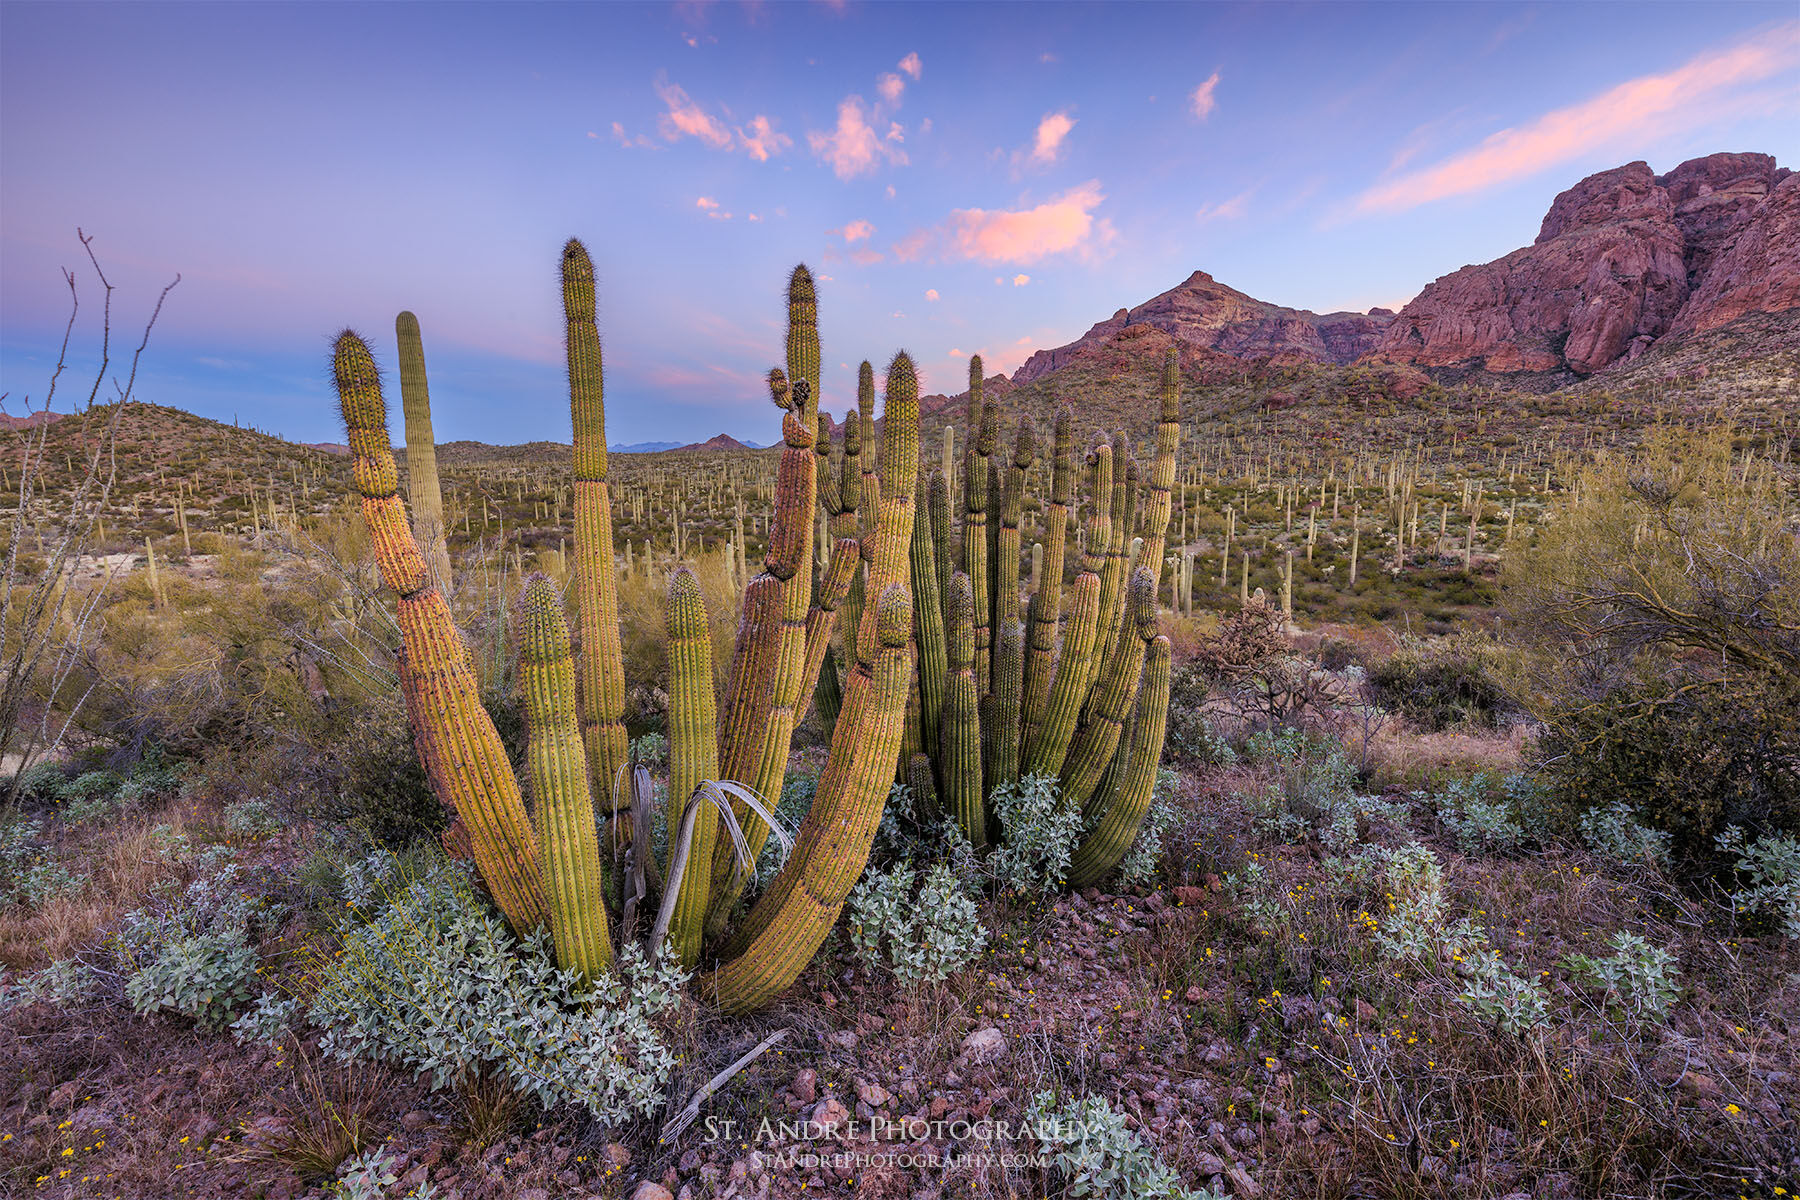 Organ pipe cactus located within Organ Pipe Cactus National Monuement on the border of Mexico and Arizona. Image taken at sunrise